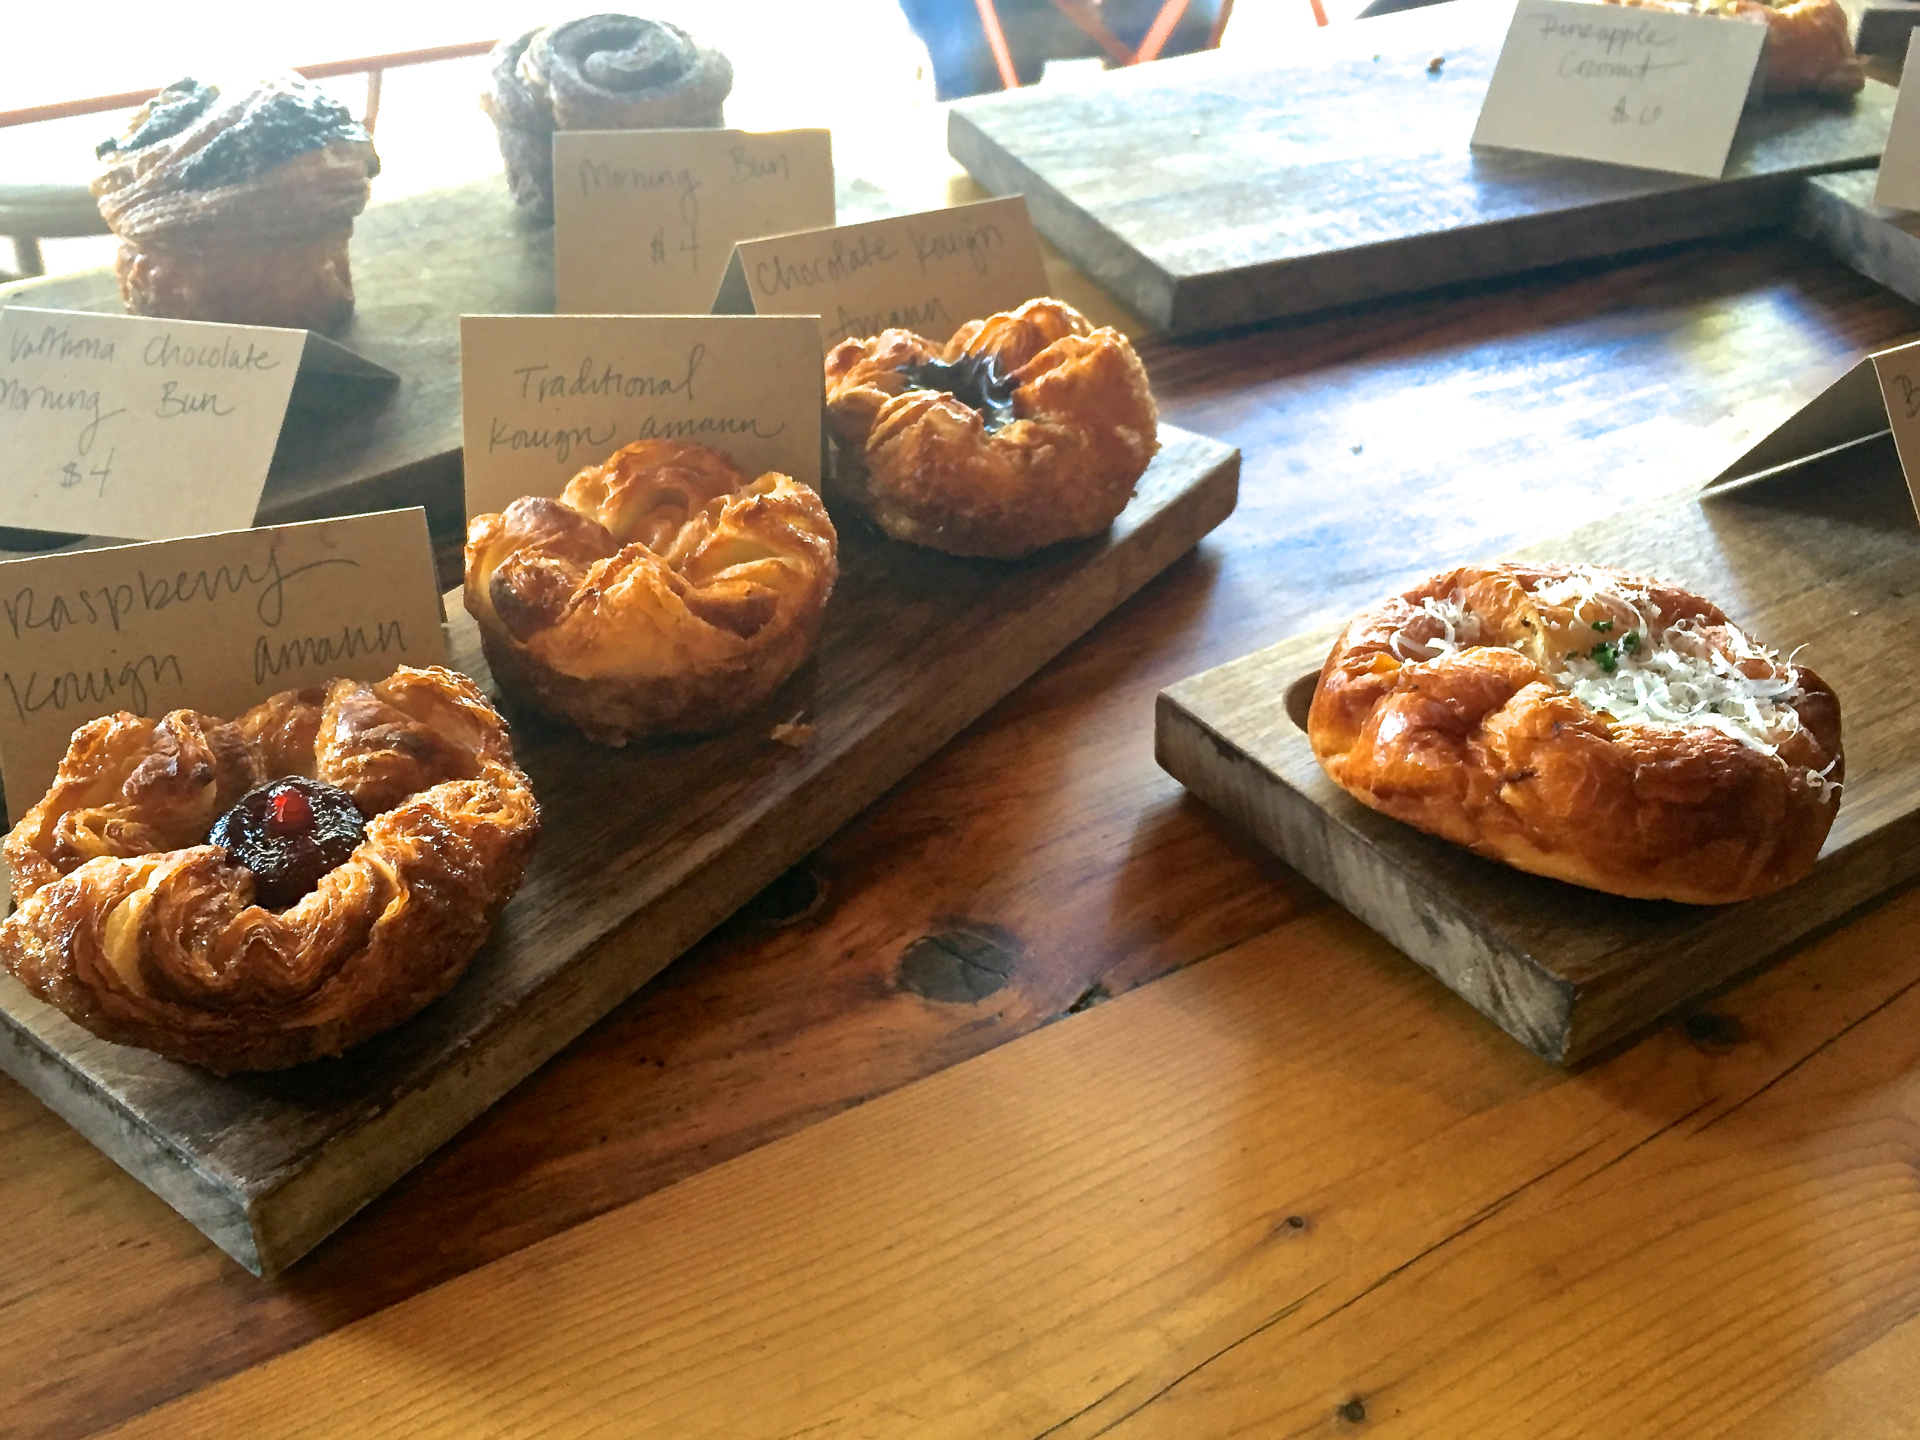 Pastries on display at a recent LoveForButter pop-up.